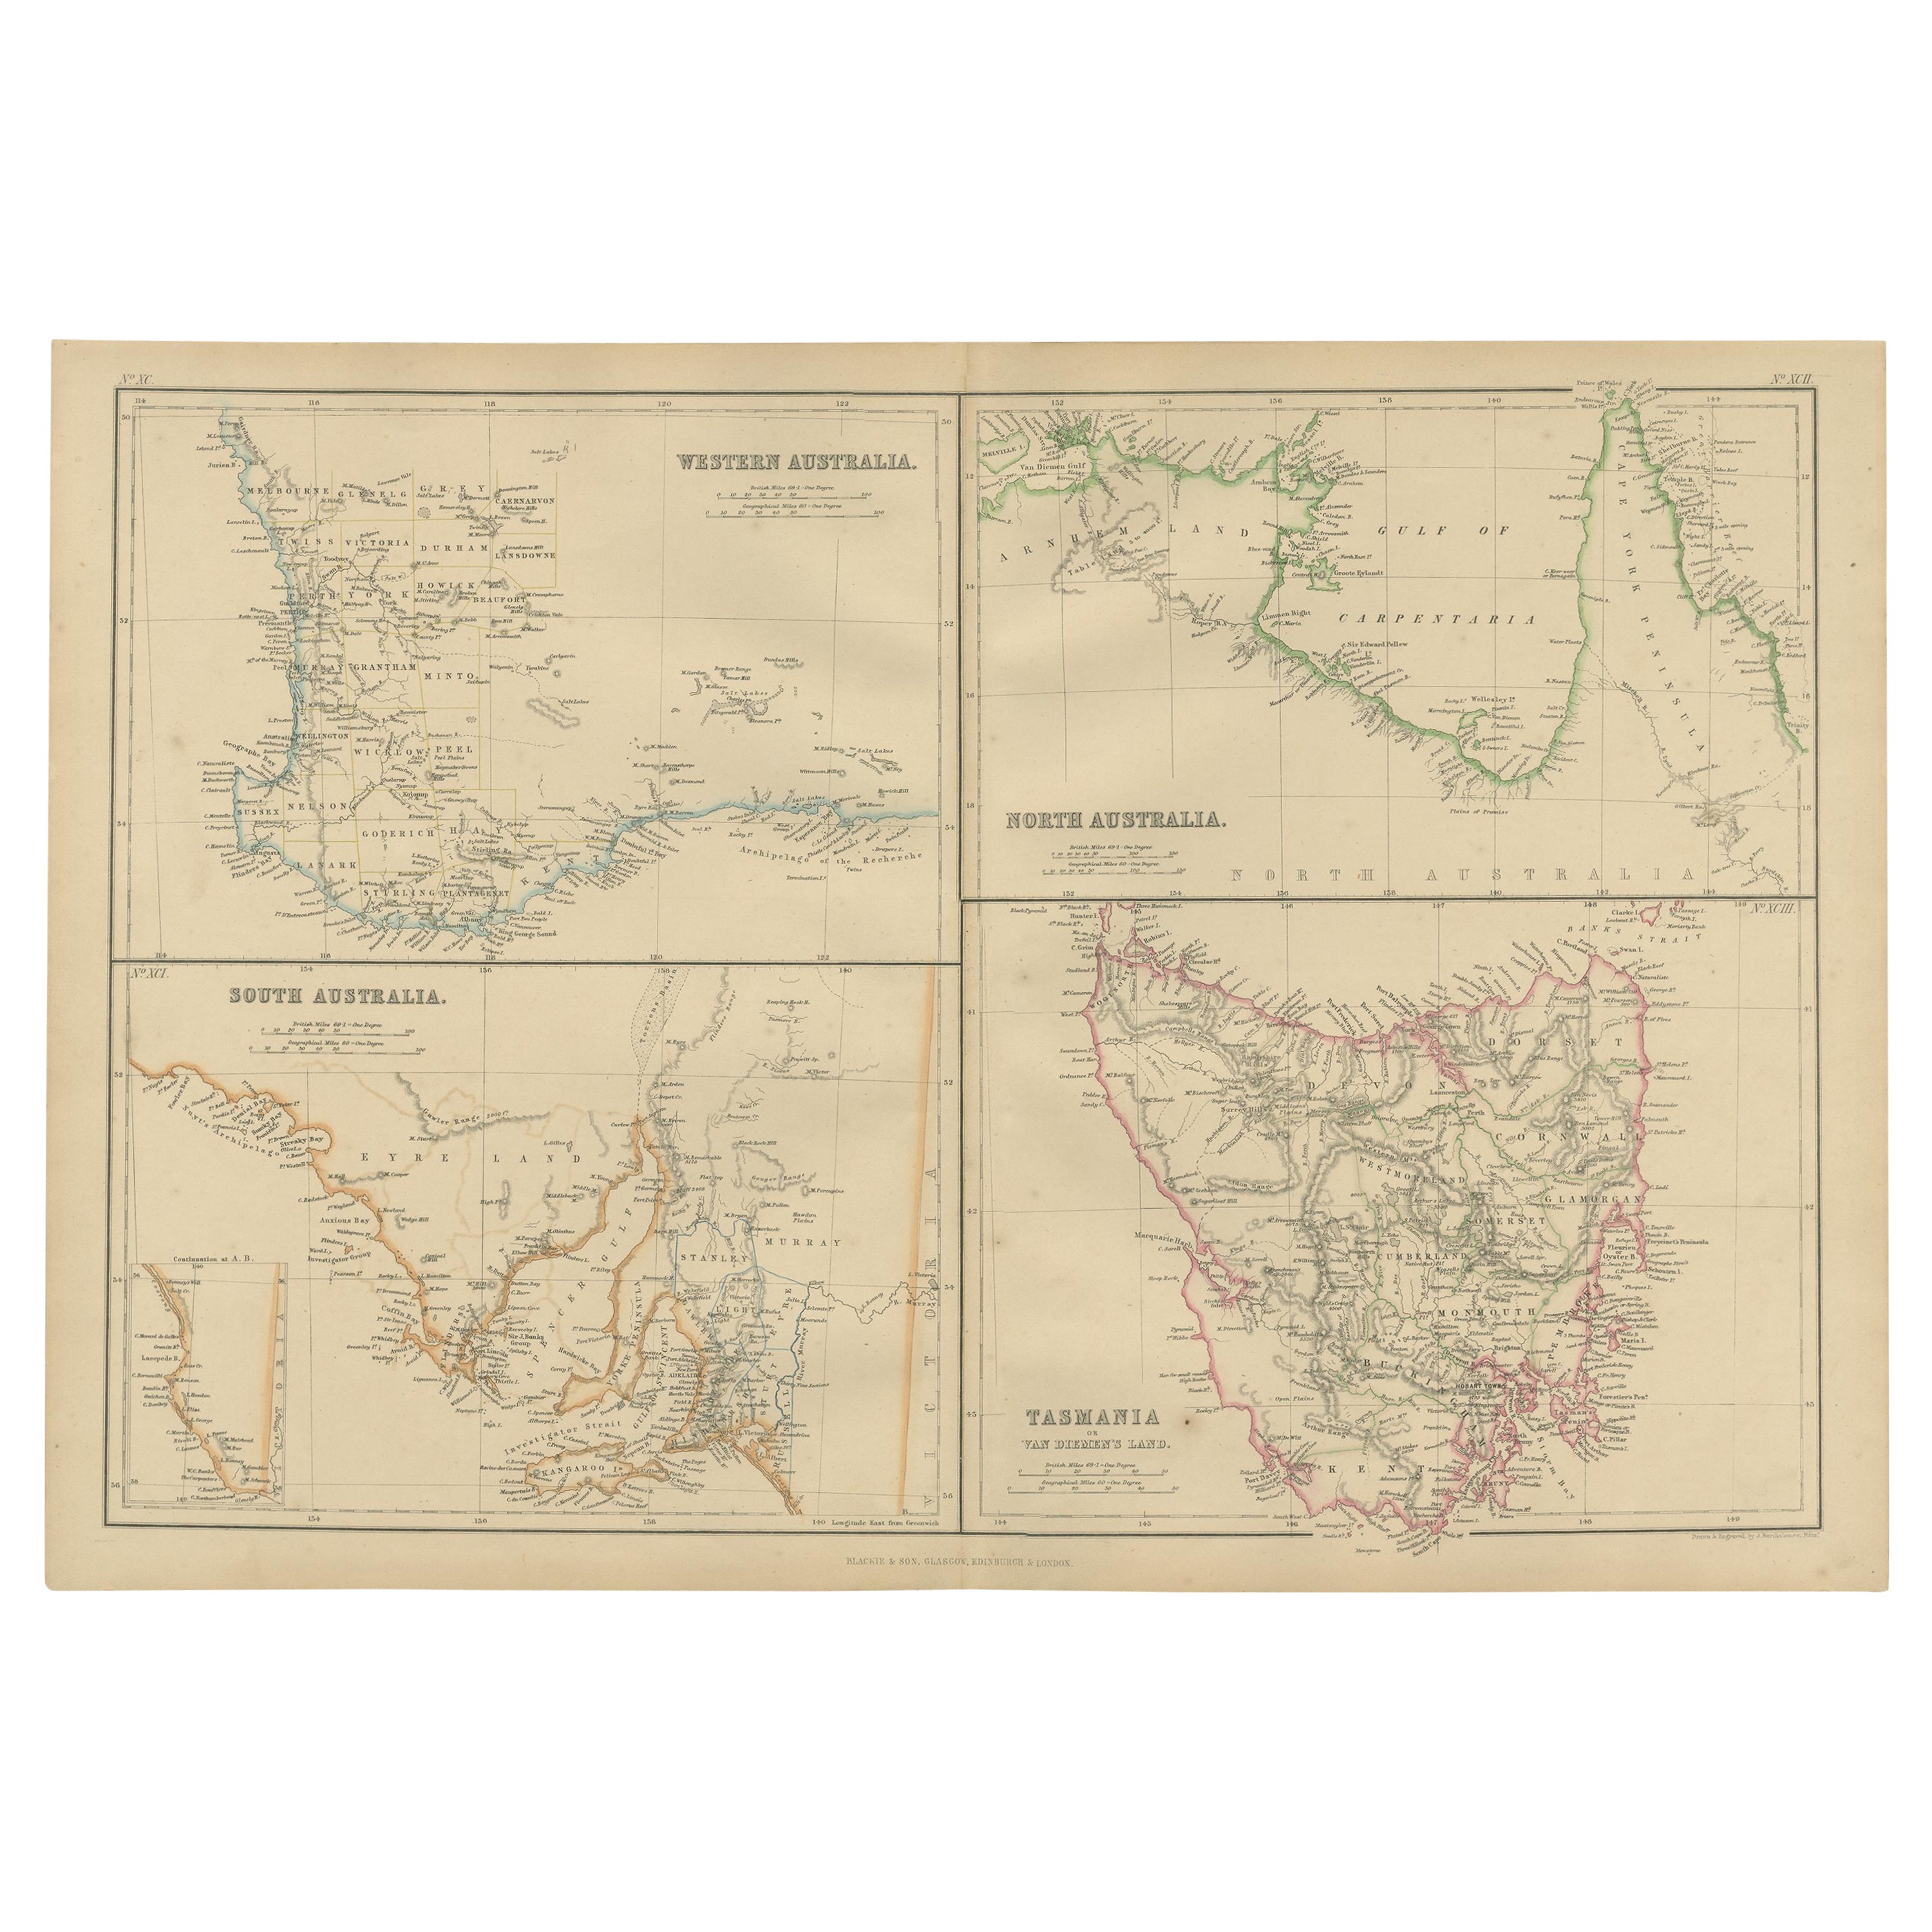 Antique Map of West, South, North Australia and Tasmania by W. G. Blackie, 1859